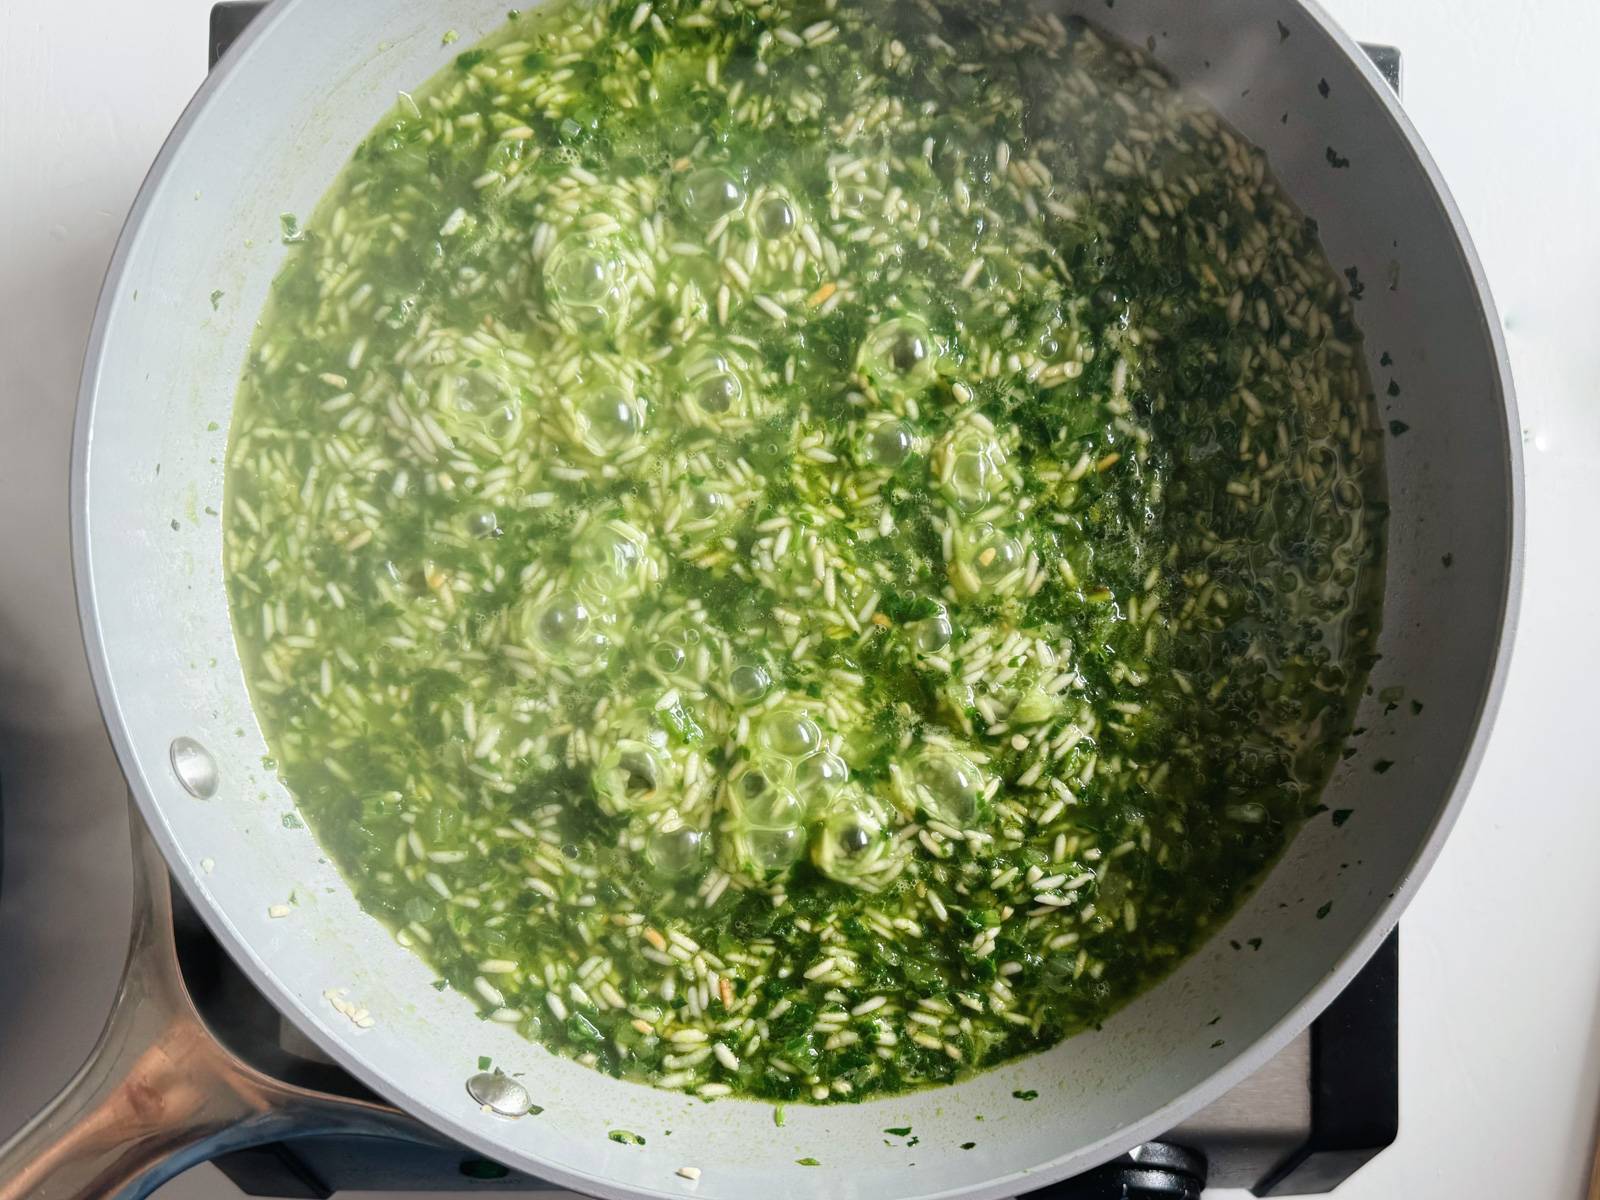 Cooking the rice and minced greens for green rice